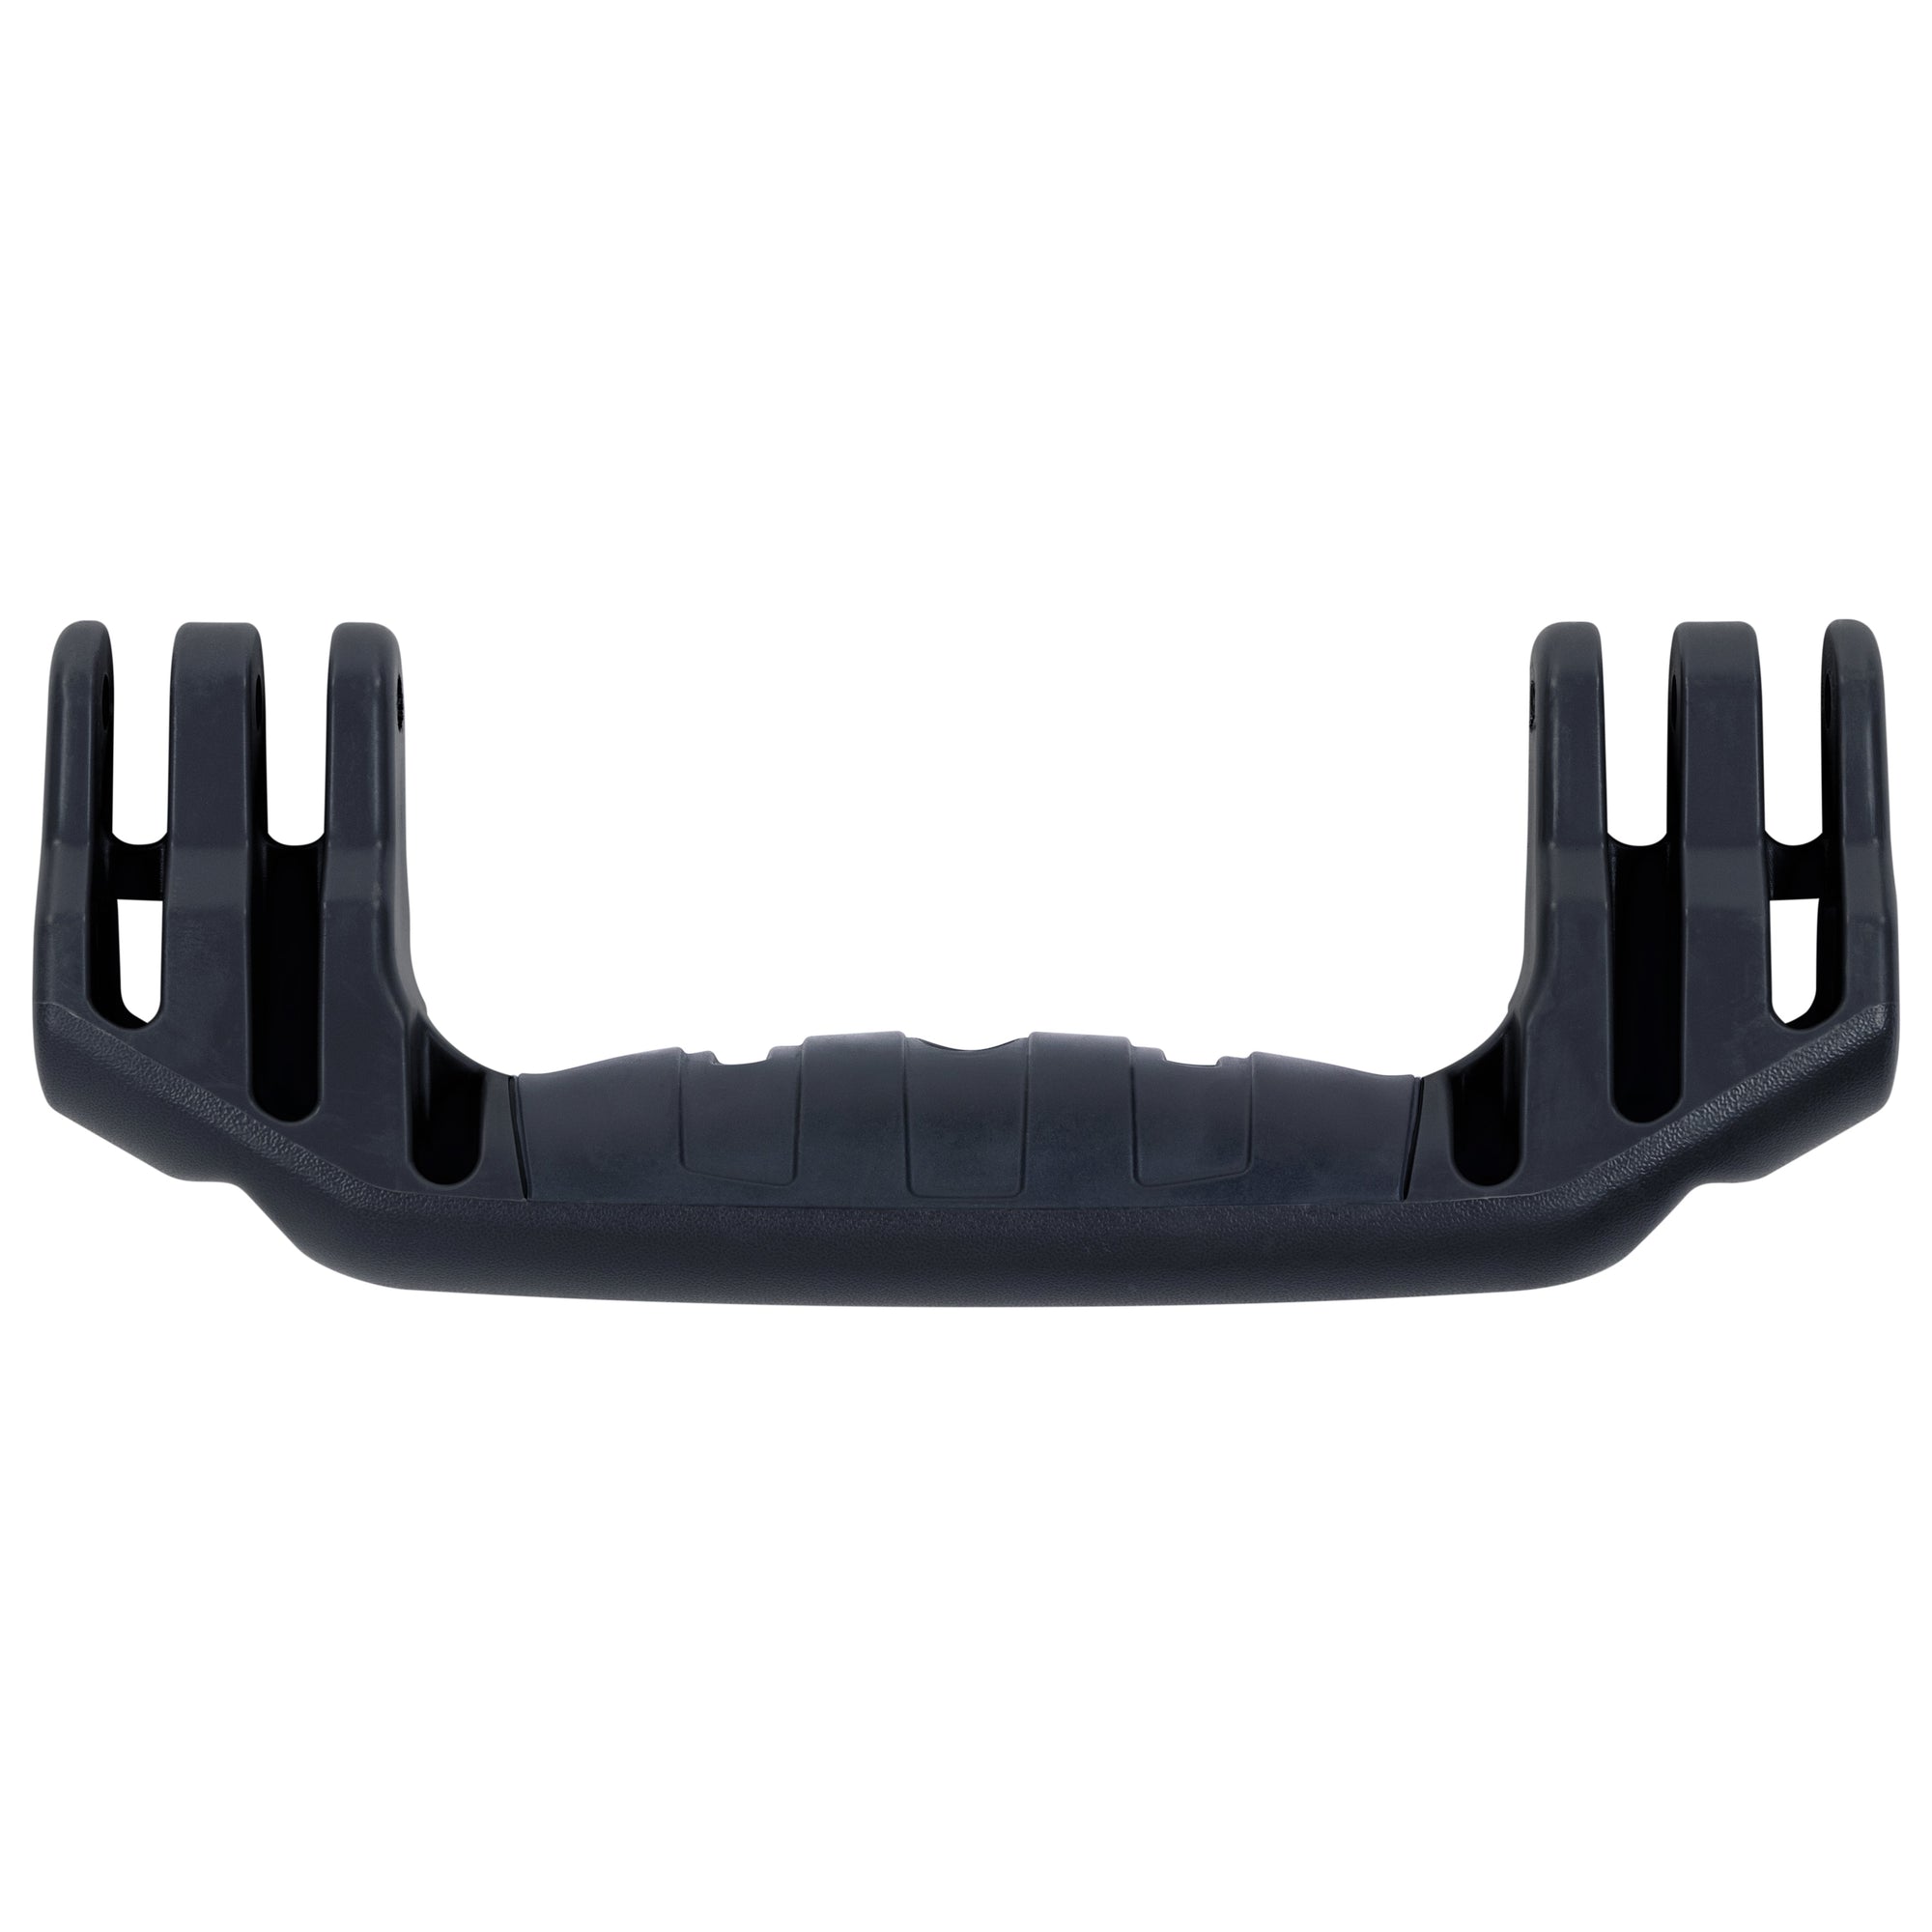 Pelican Rubber Overmolded Replacement Handle, Medium, Black (3-Prong) ColorCase 